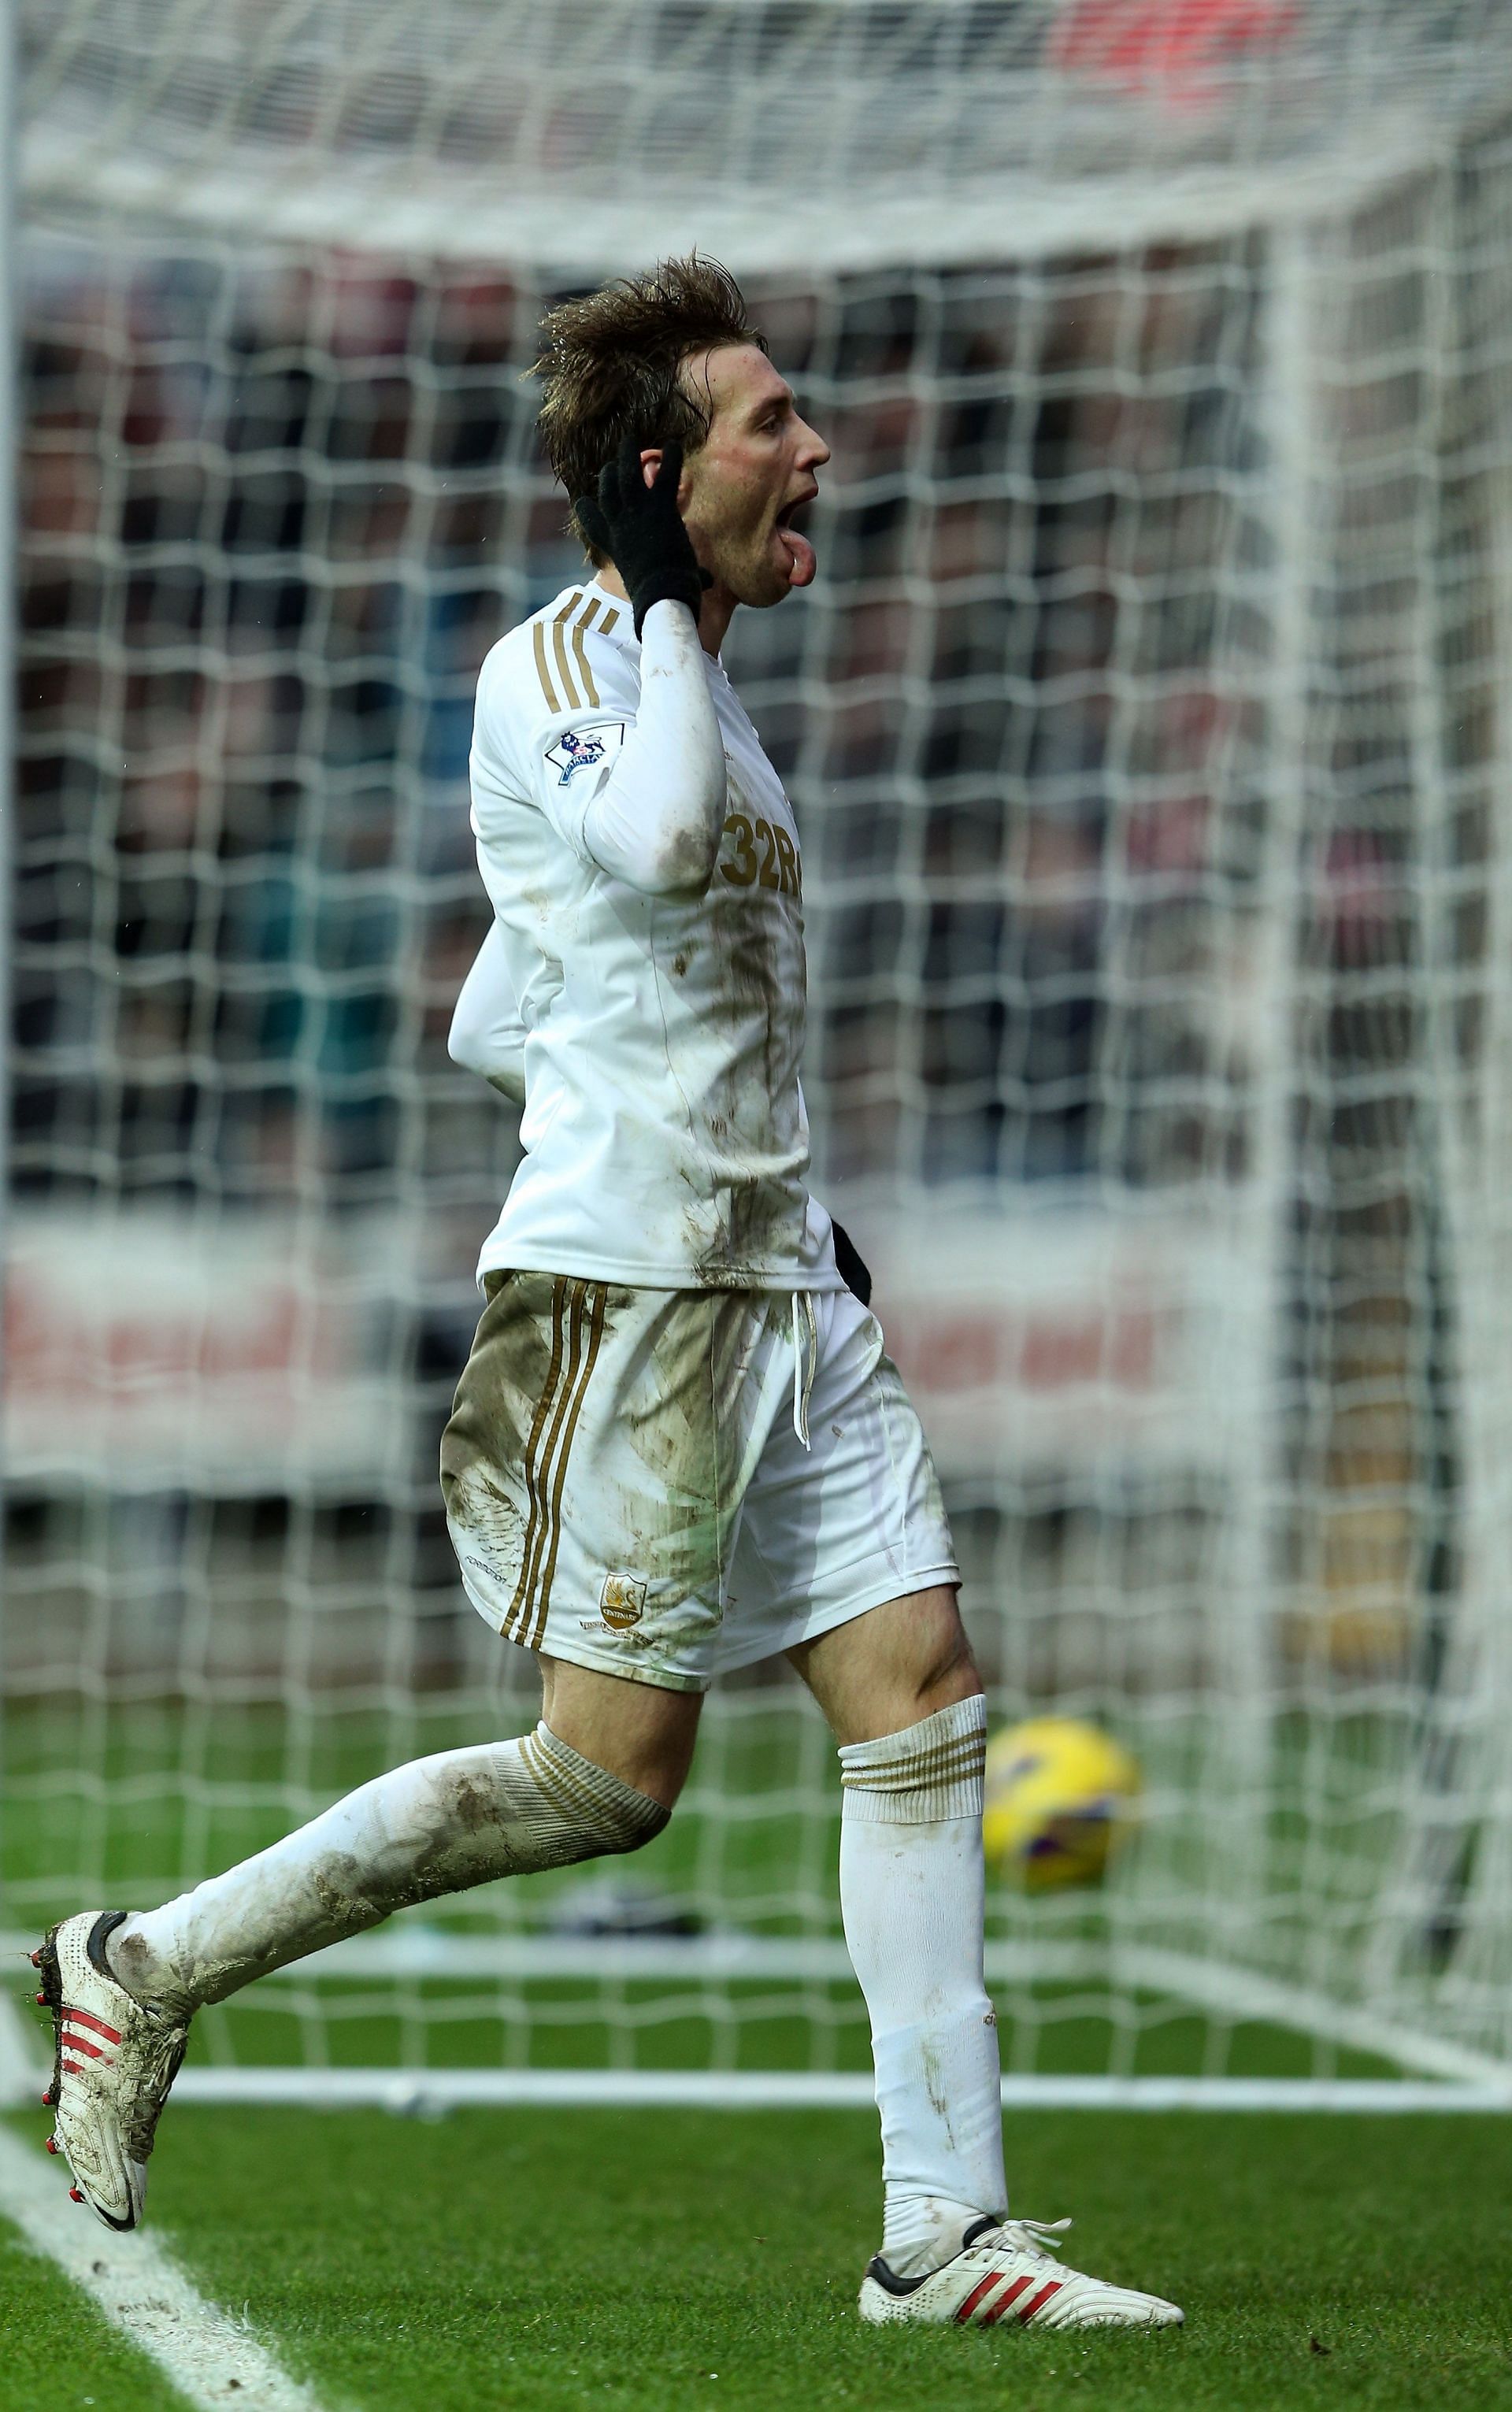 The ultimate &quot;streets won&#039;t forget&quot; player, the Spaniard was magical in his debut season with Swansea